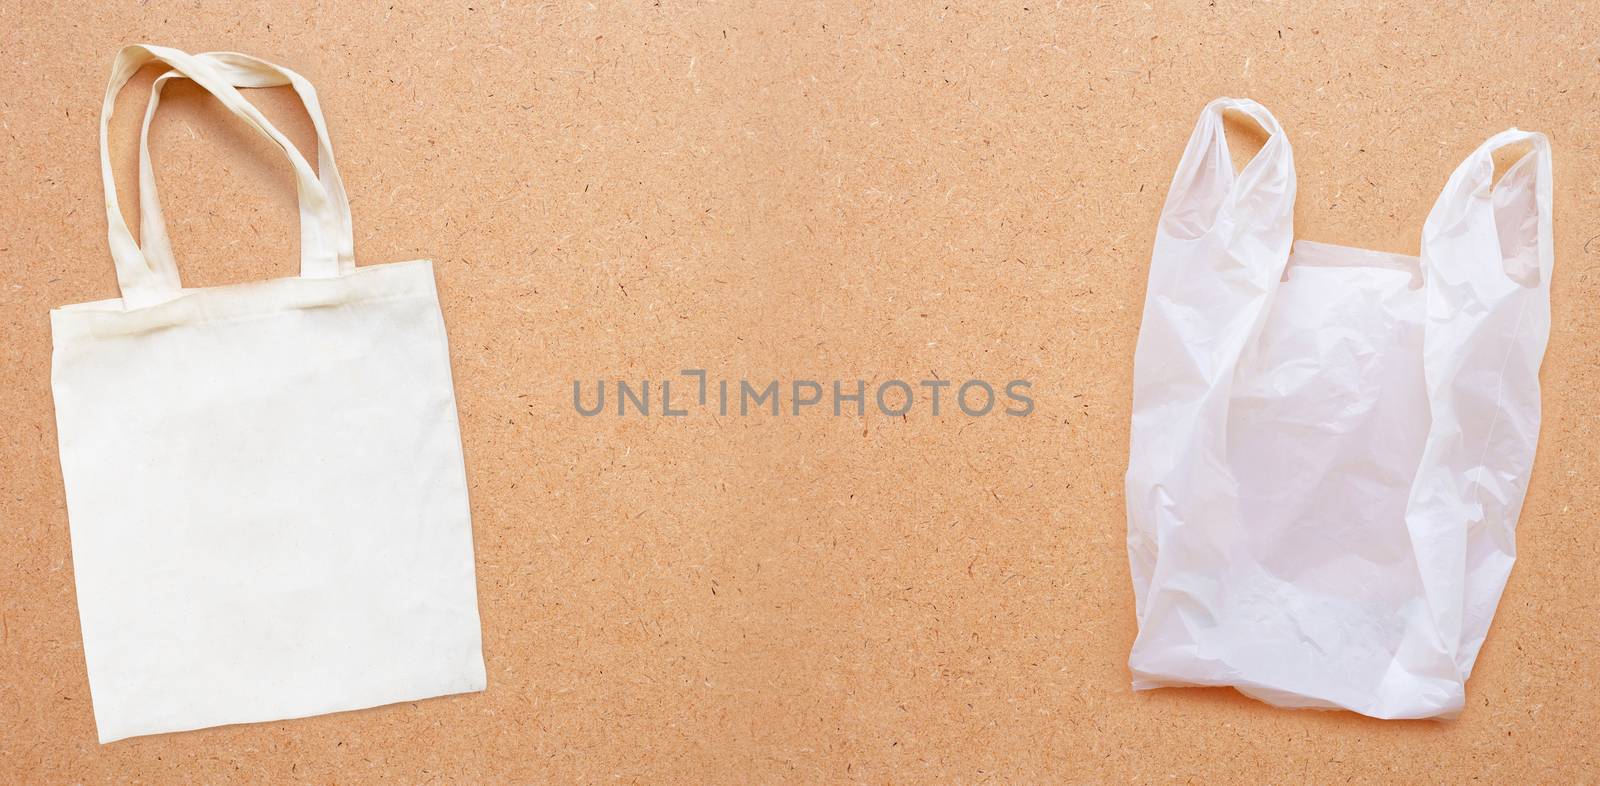 White fabric bag with white plastic bag on plywood background. by Bowonpat